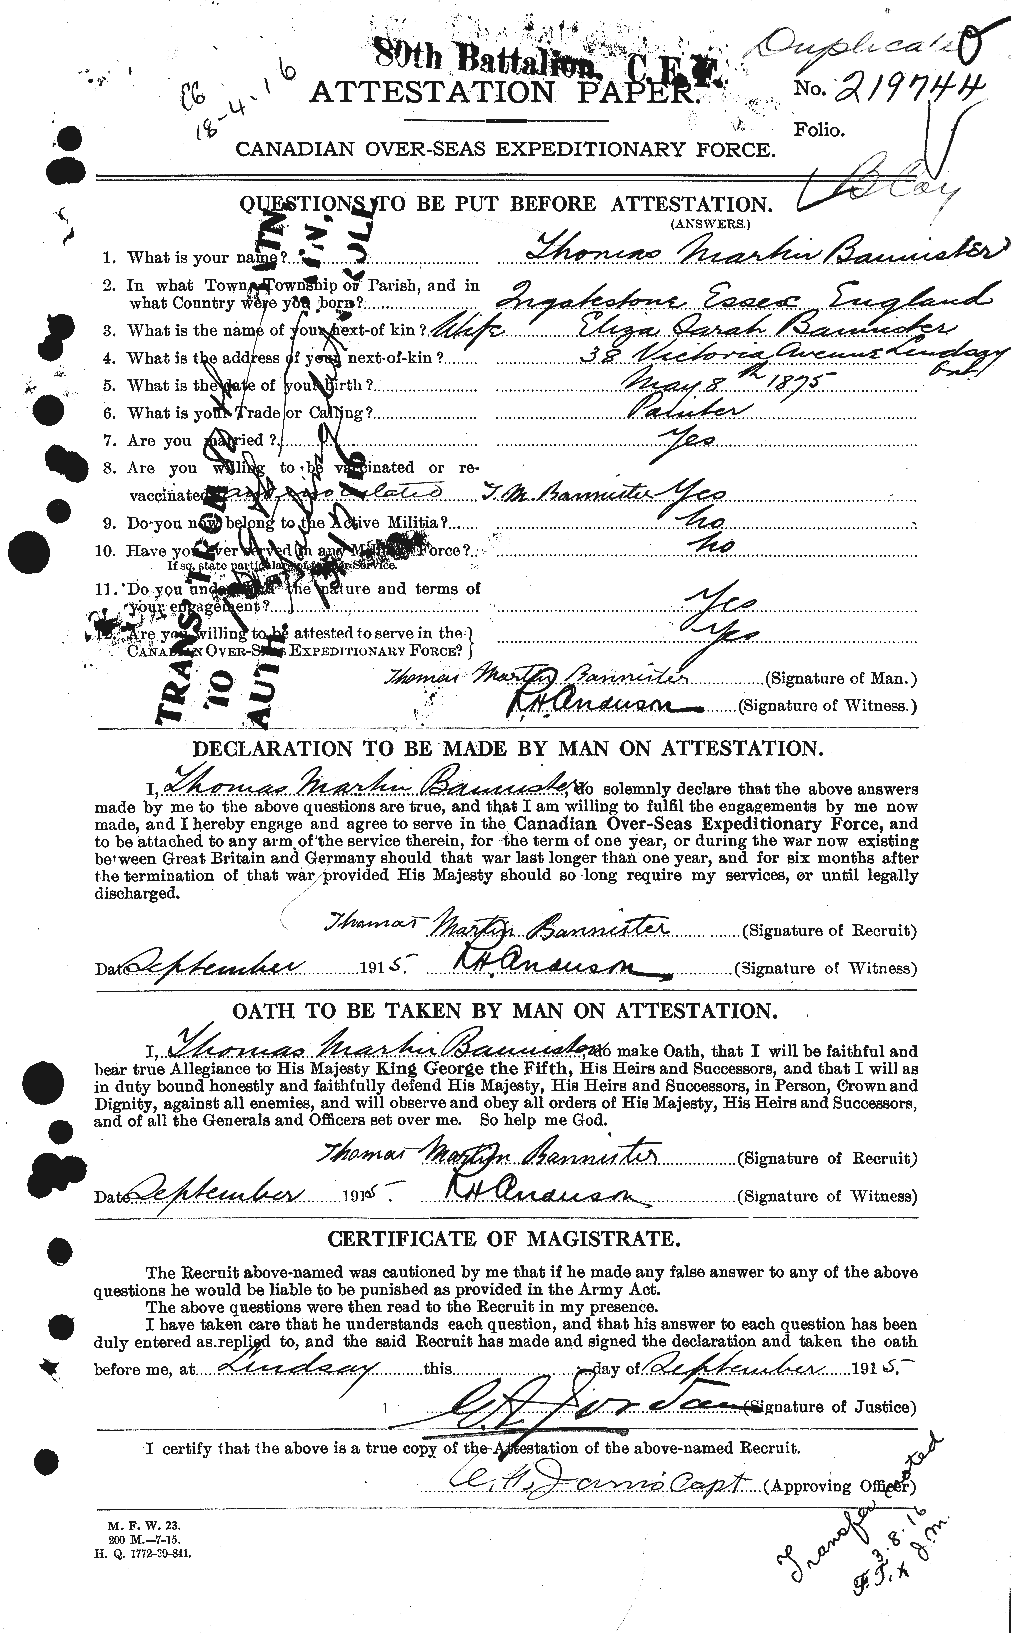 Personnel Records of the First World War - CEF 224760a